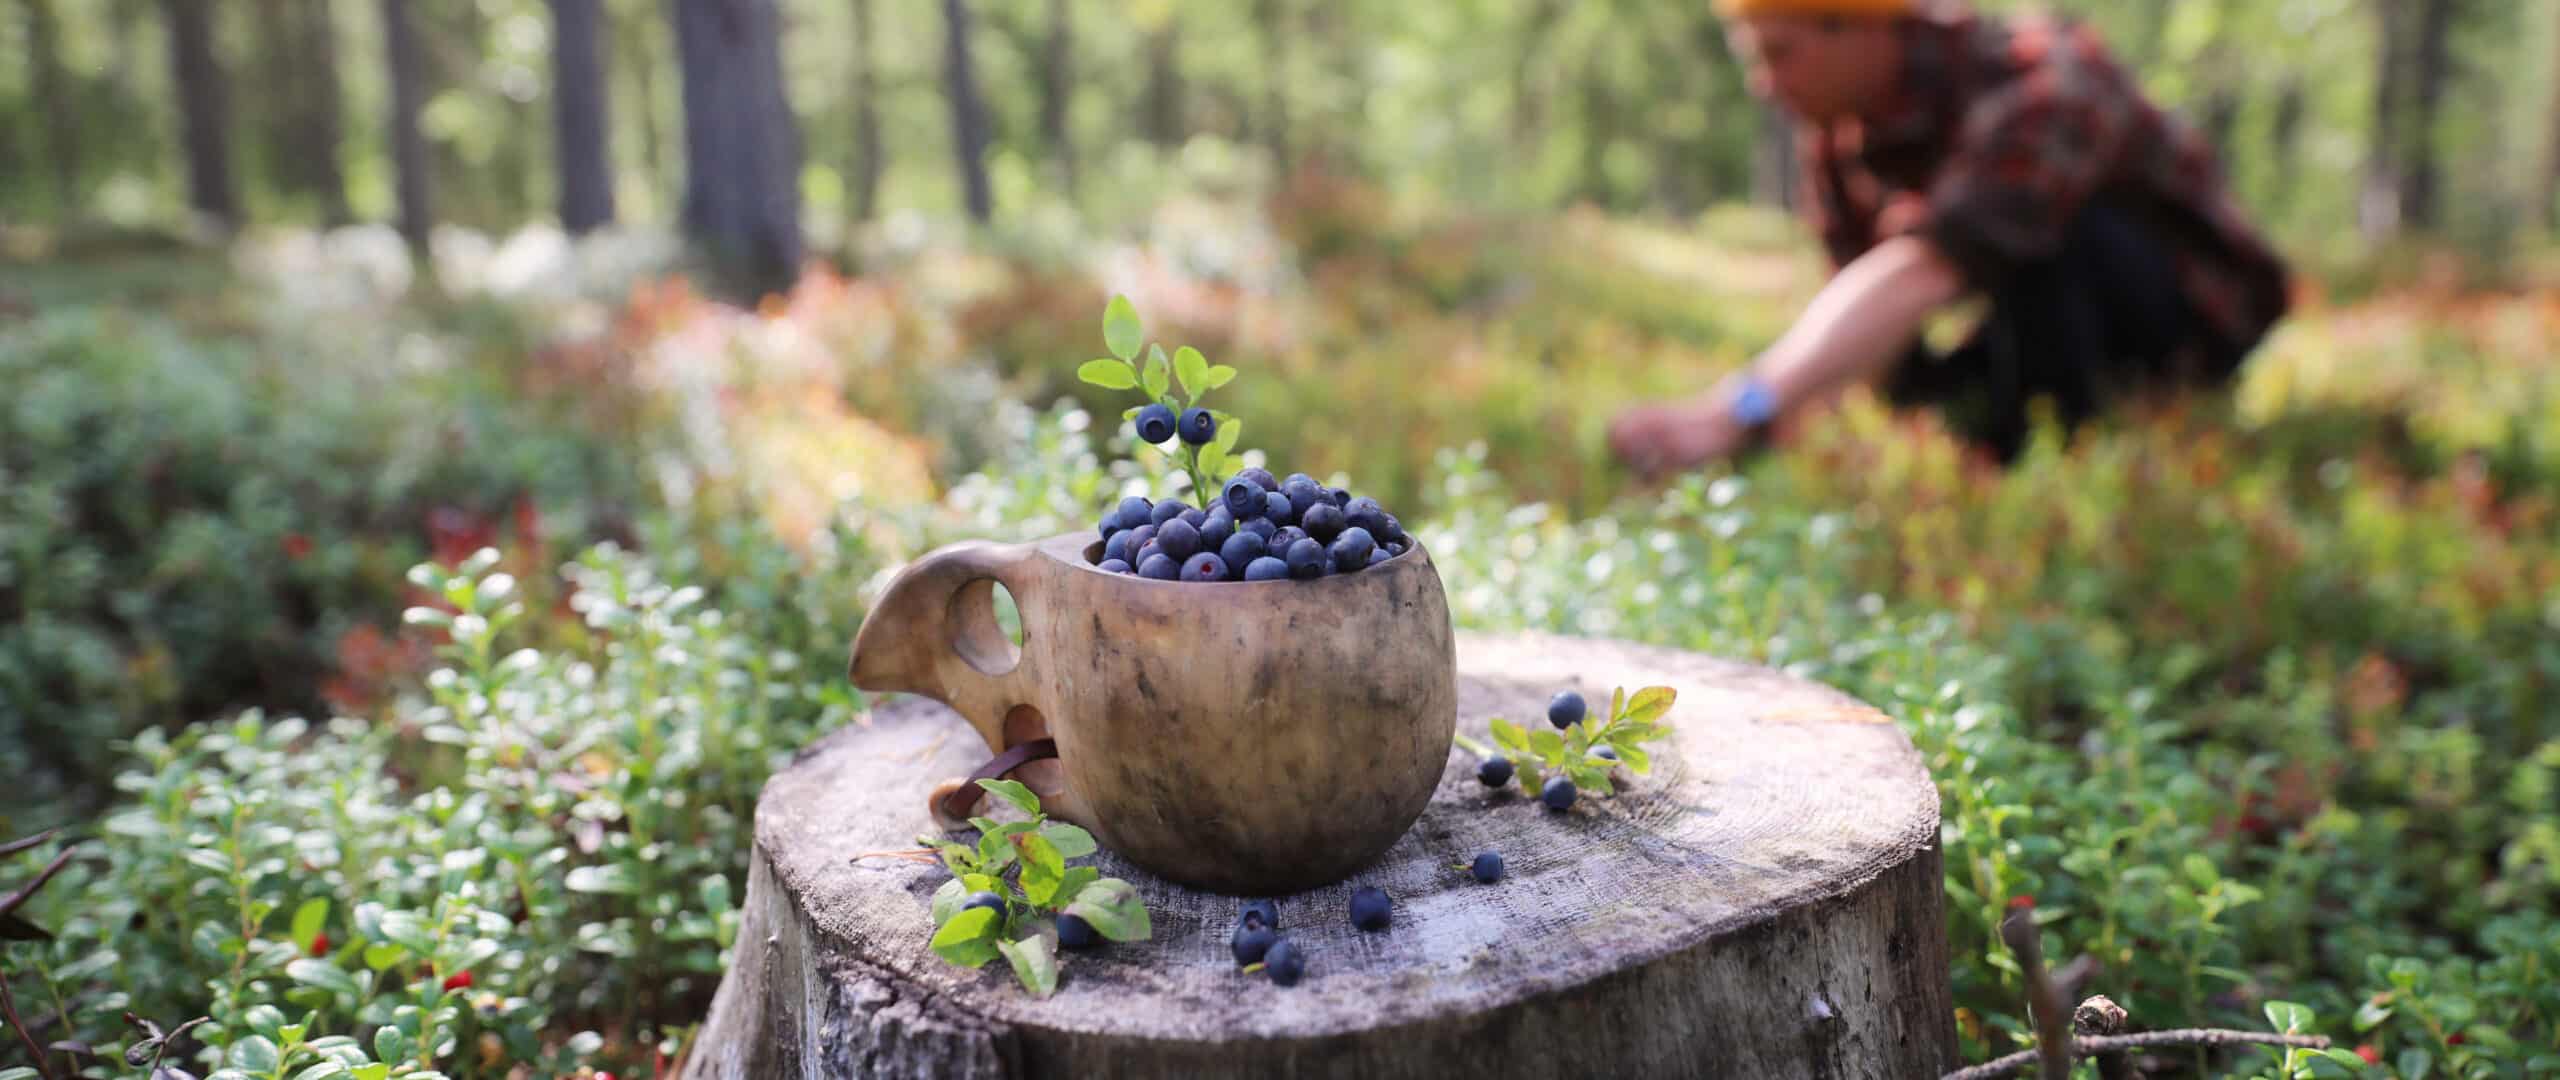 Wooden cup on a tree stump filled with blueberries. There is a person on the background picking berries.